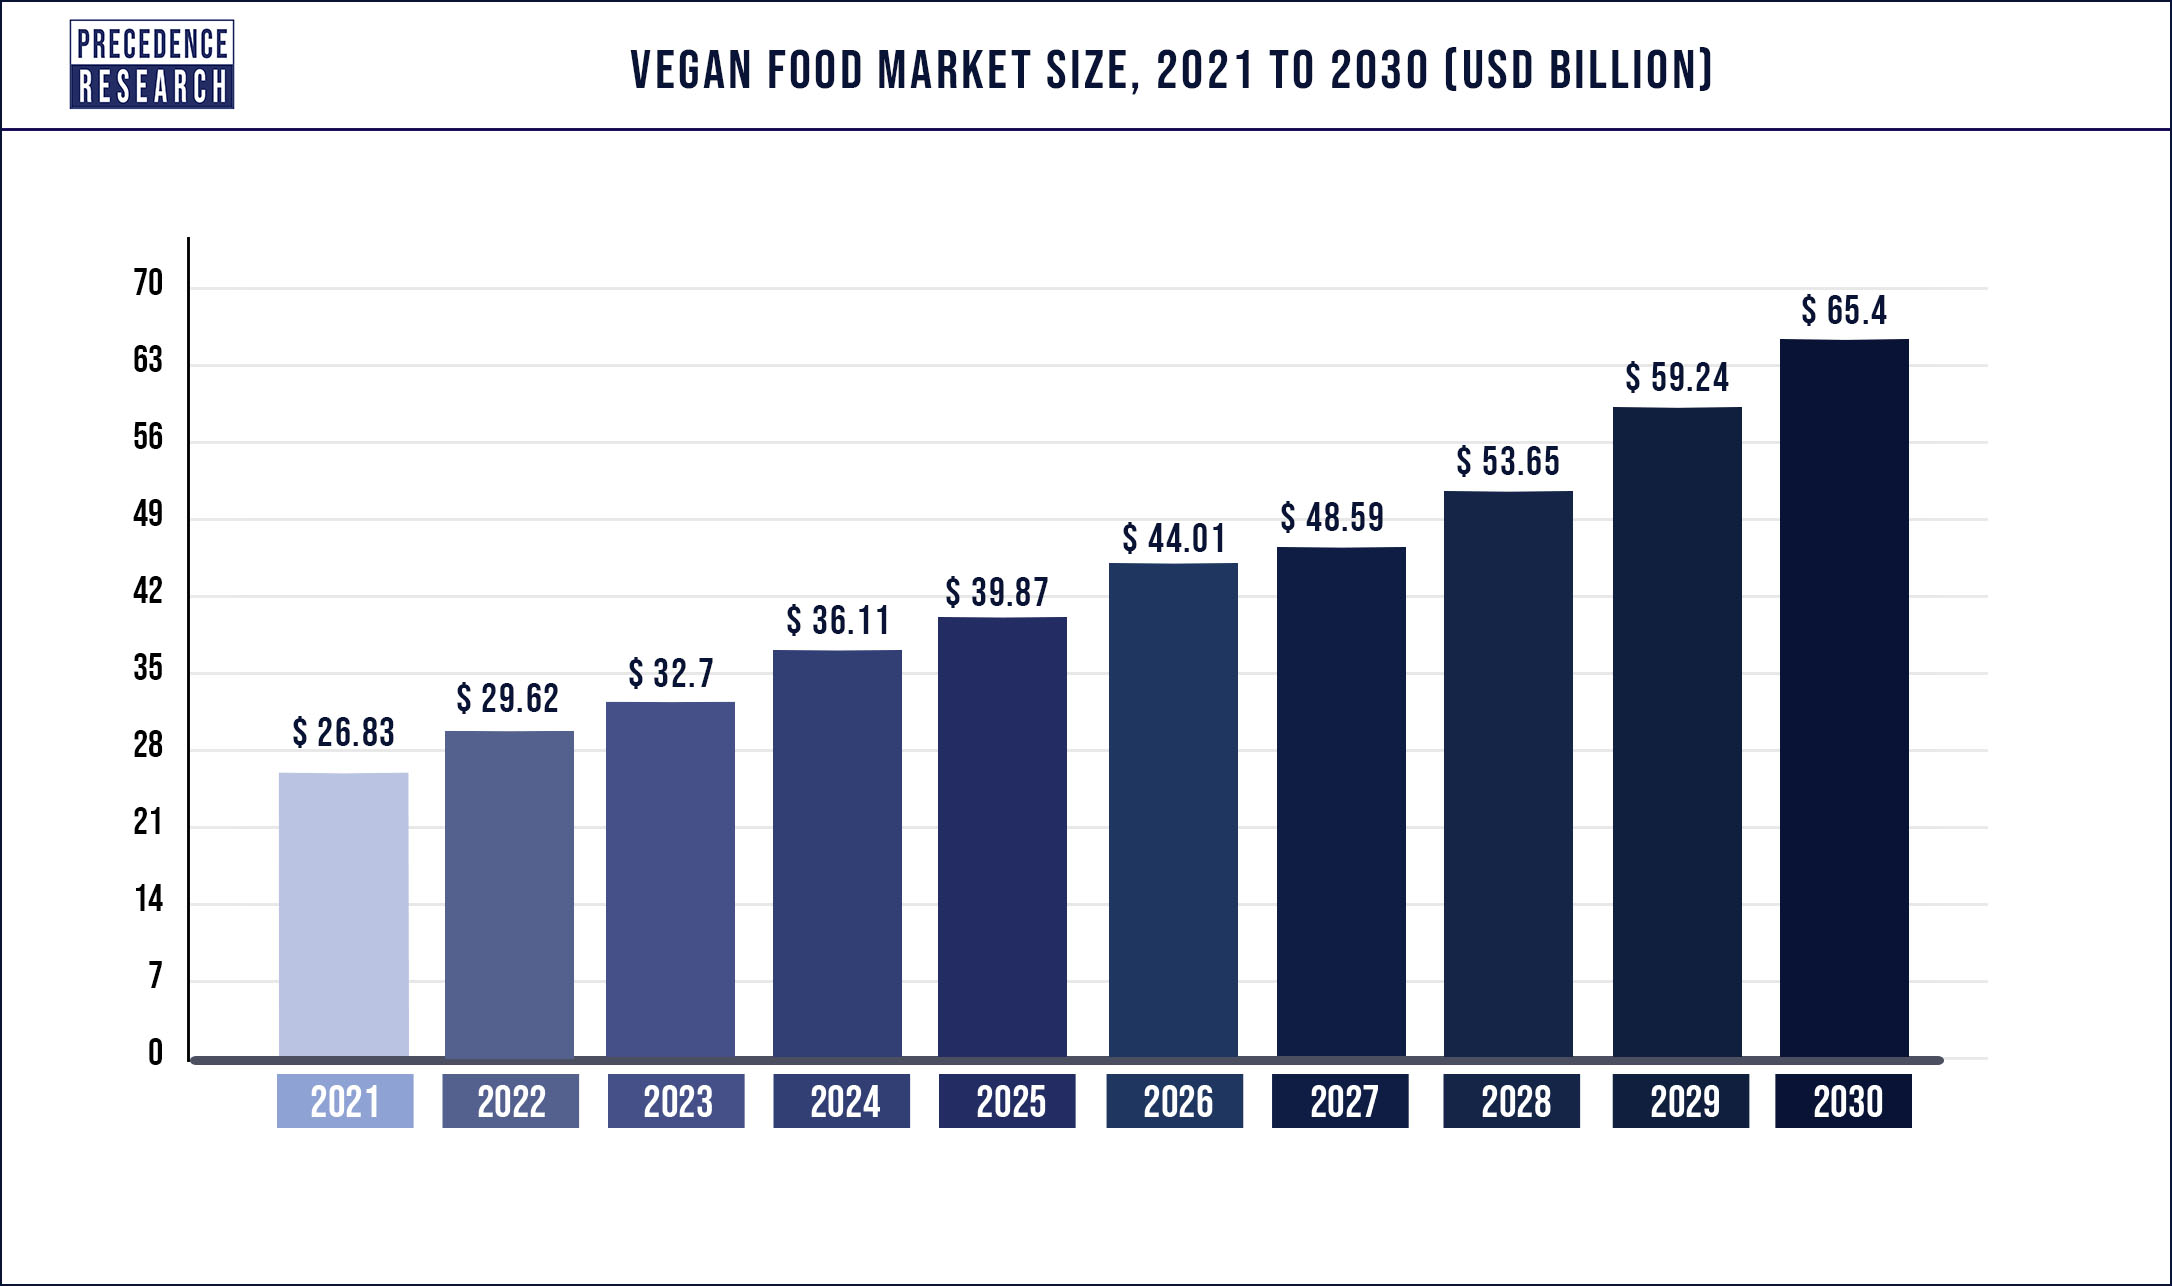 Vegan Food Market Size is Forecasted to Reach US$ 65.4 Billion by 2030